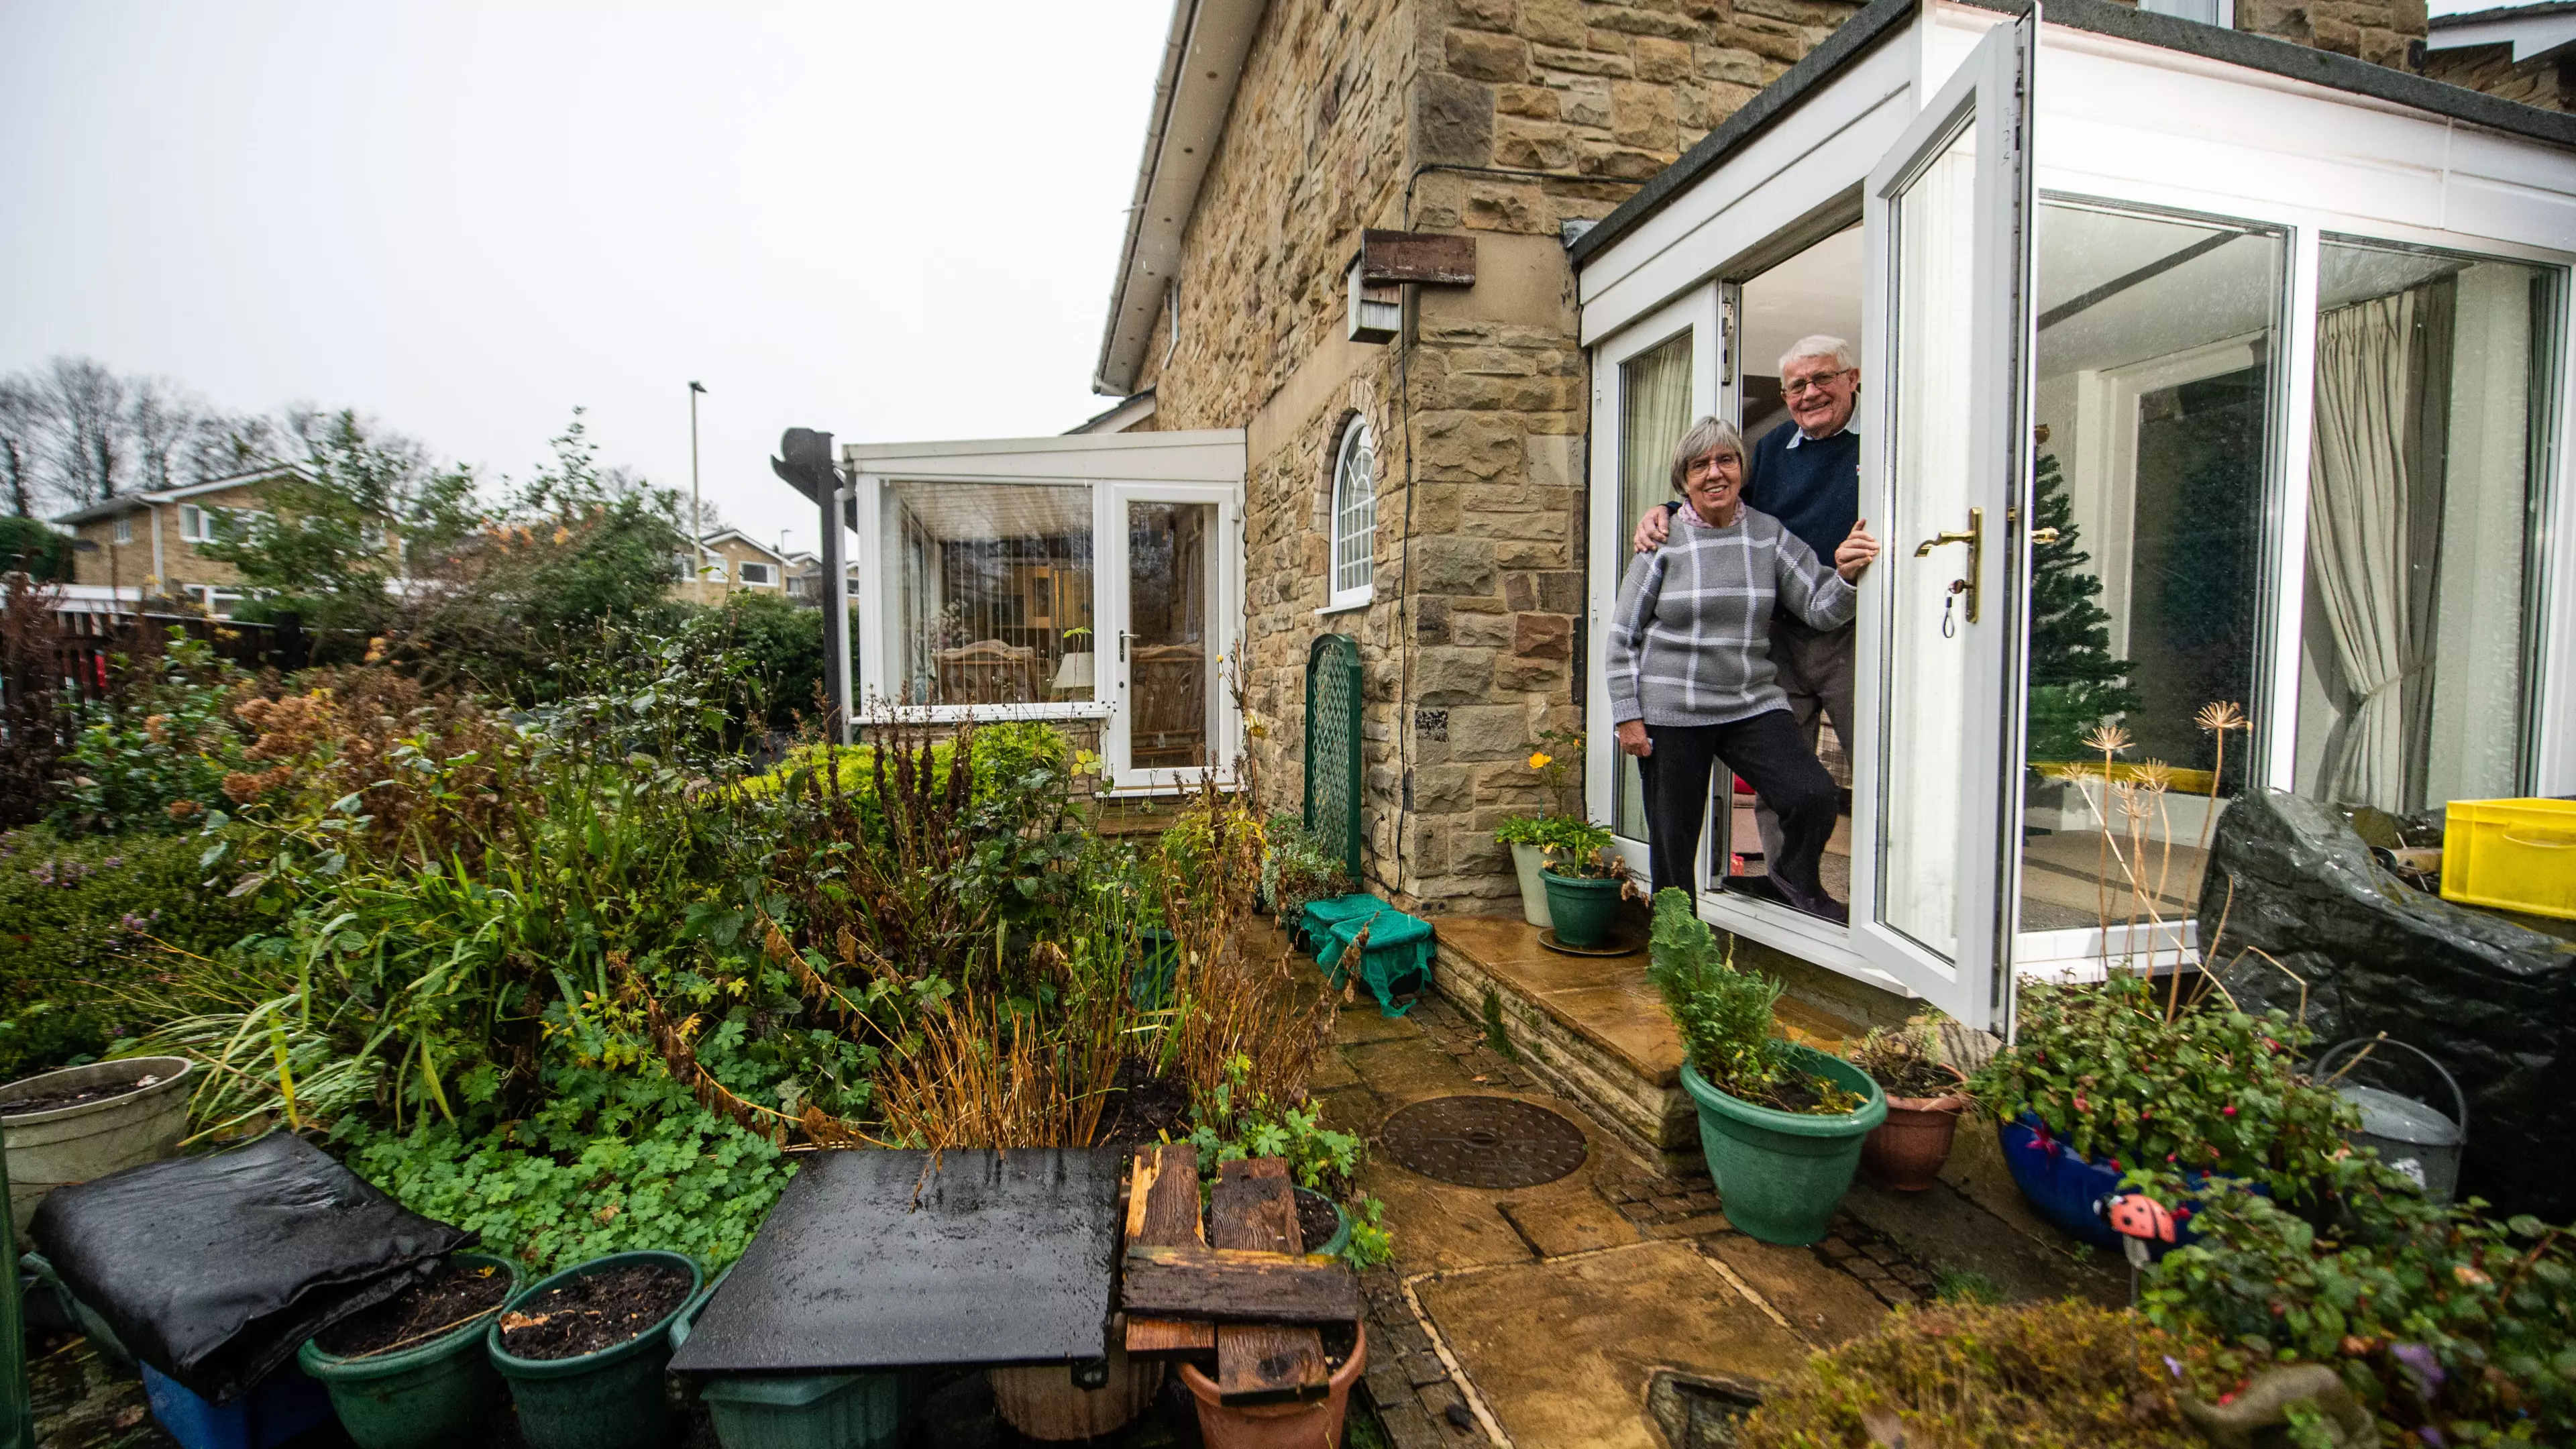 Couple Living In Tier Two Can't Have People In Garden Because It's In Tier Three